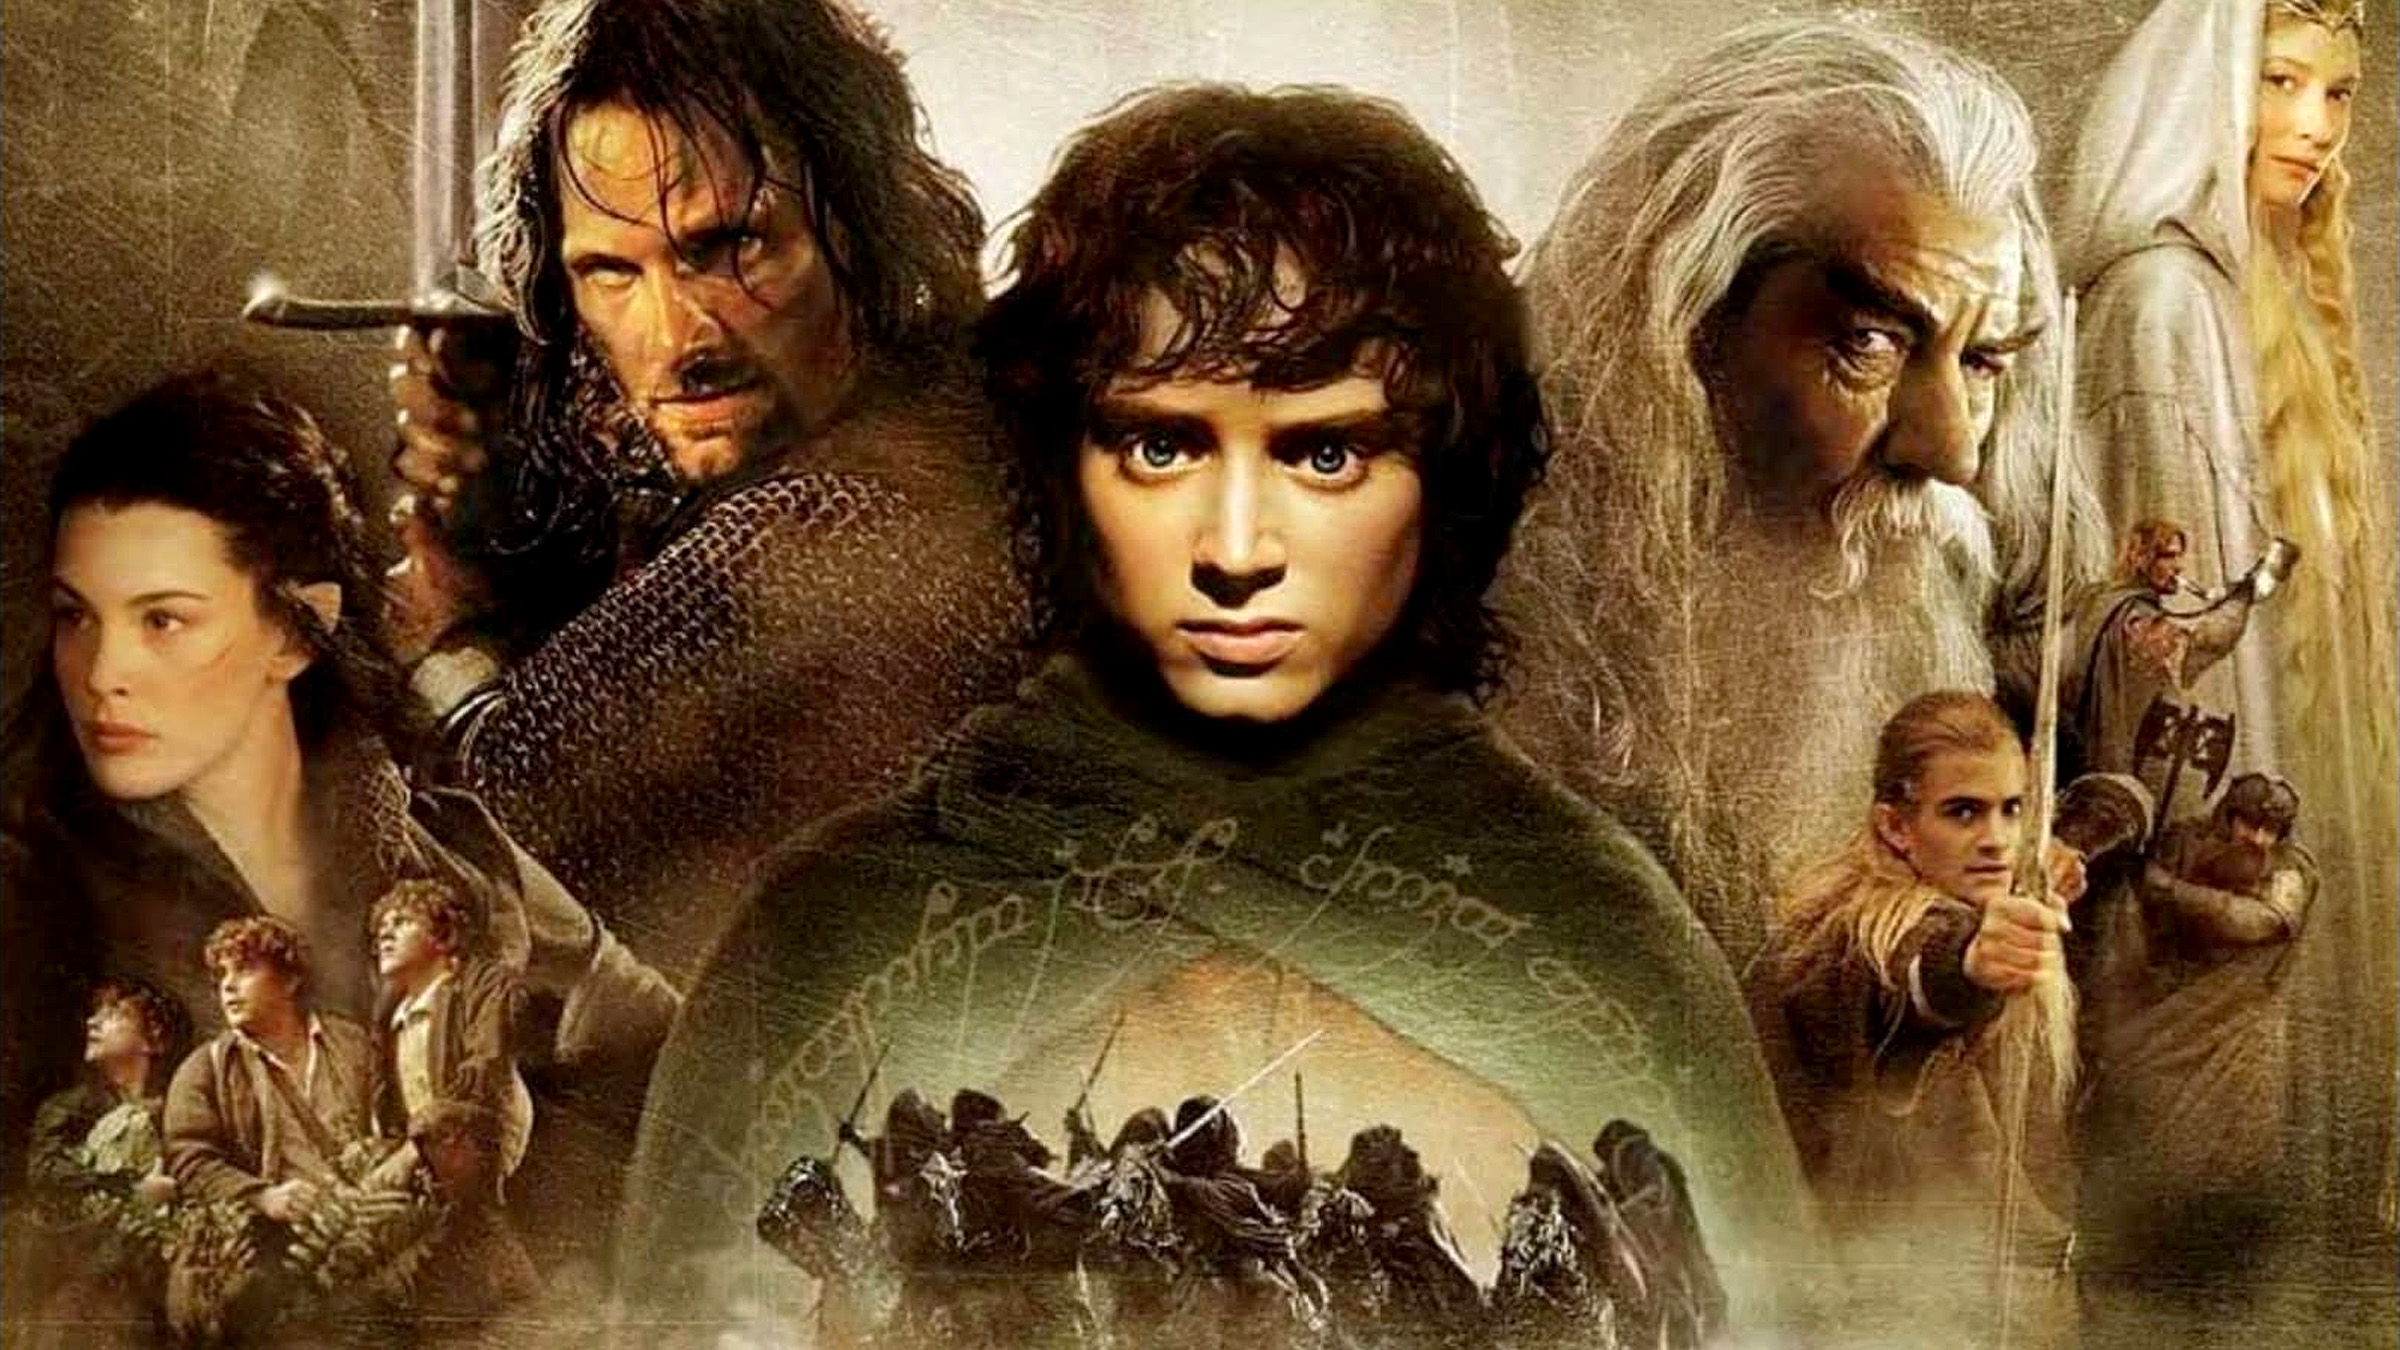 “The Lord of the Rings” Turns 20, But the Road Goes Ever On.